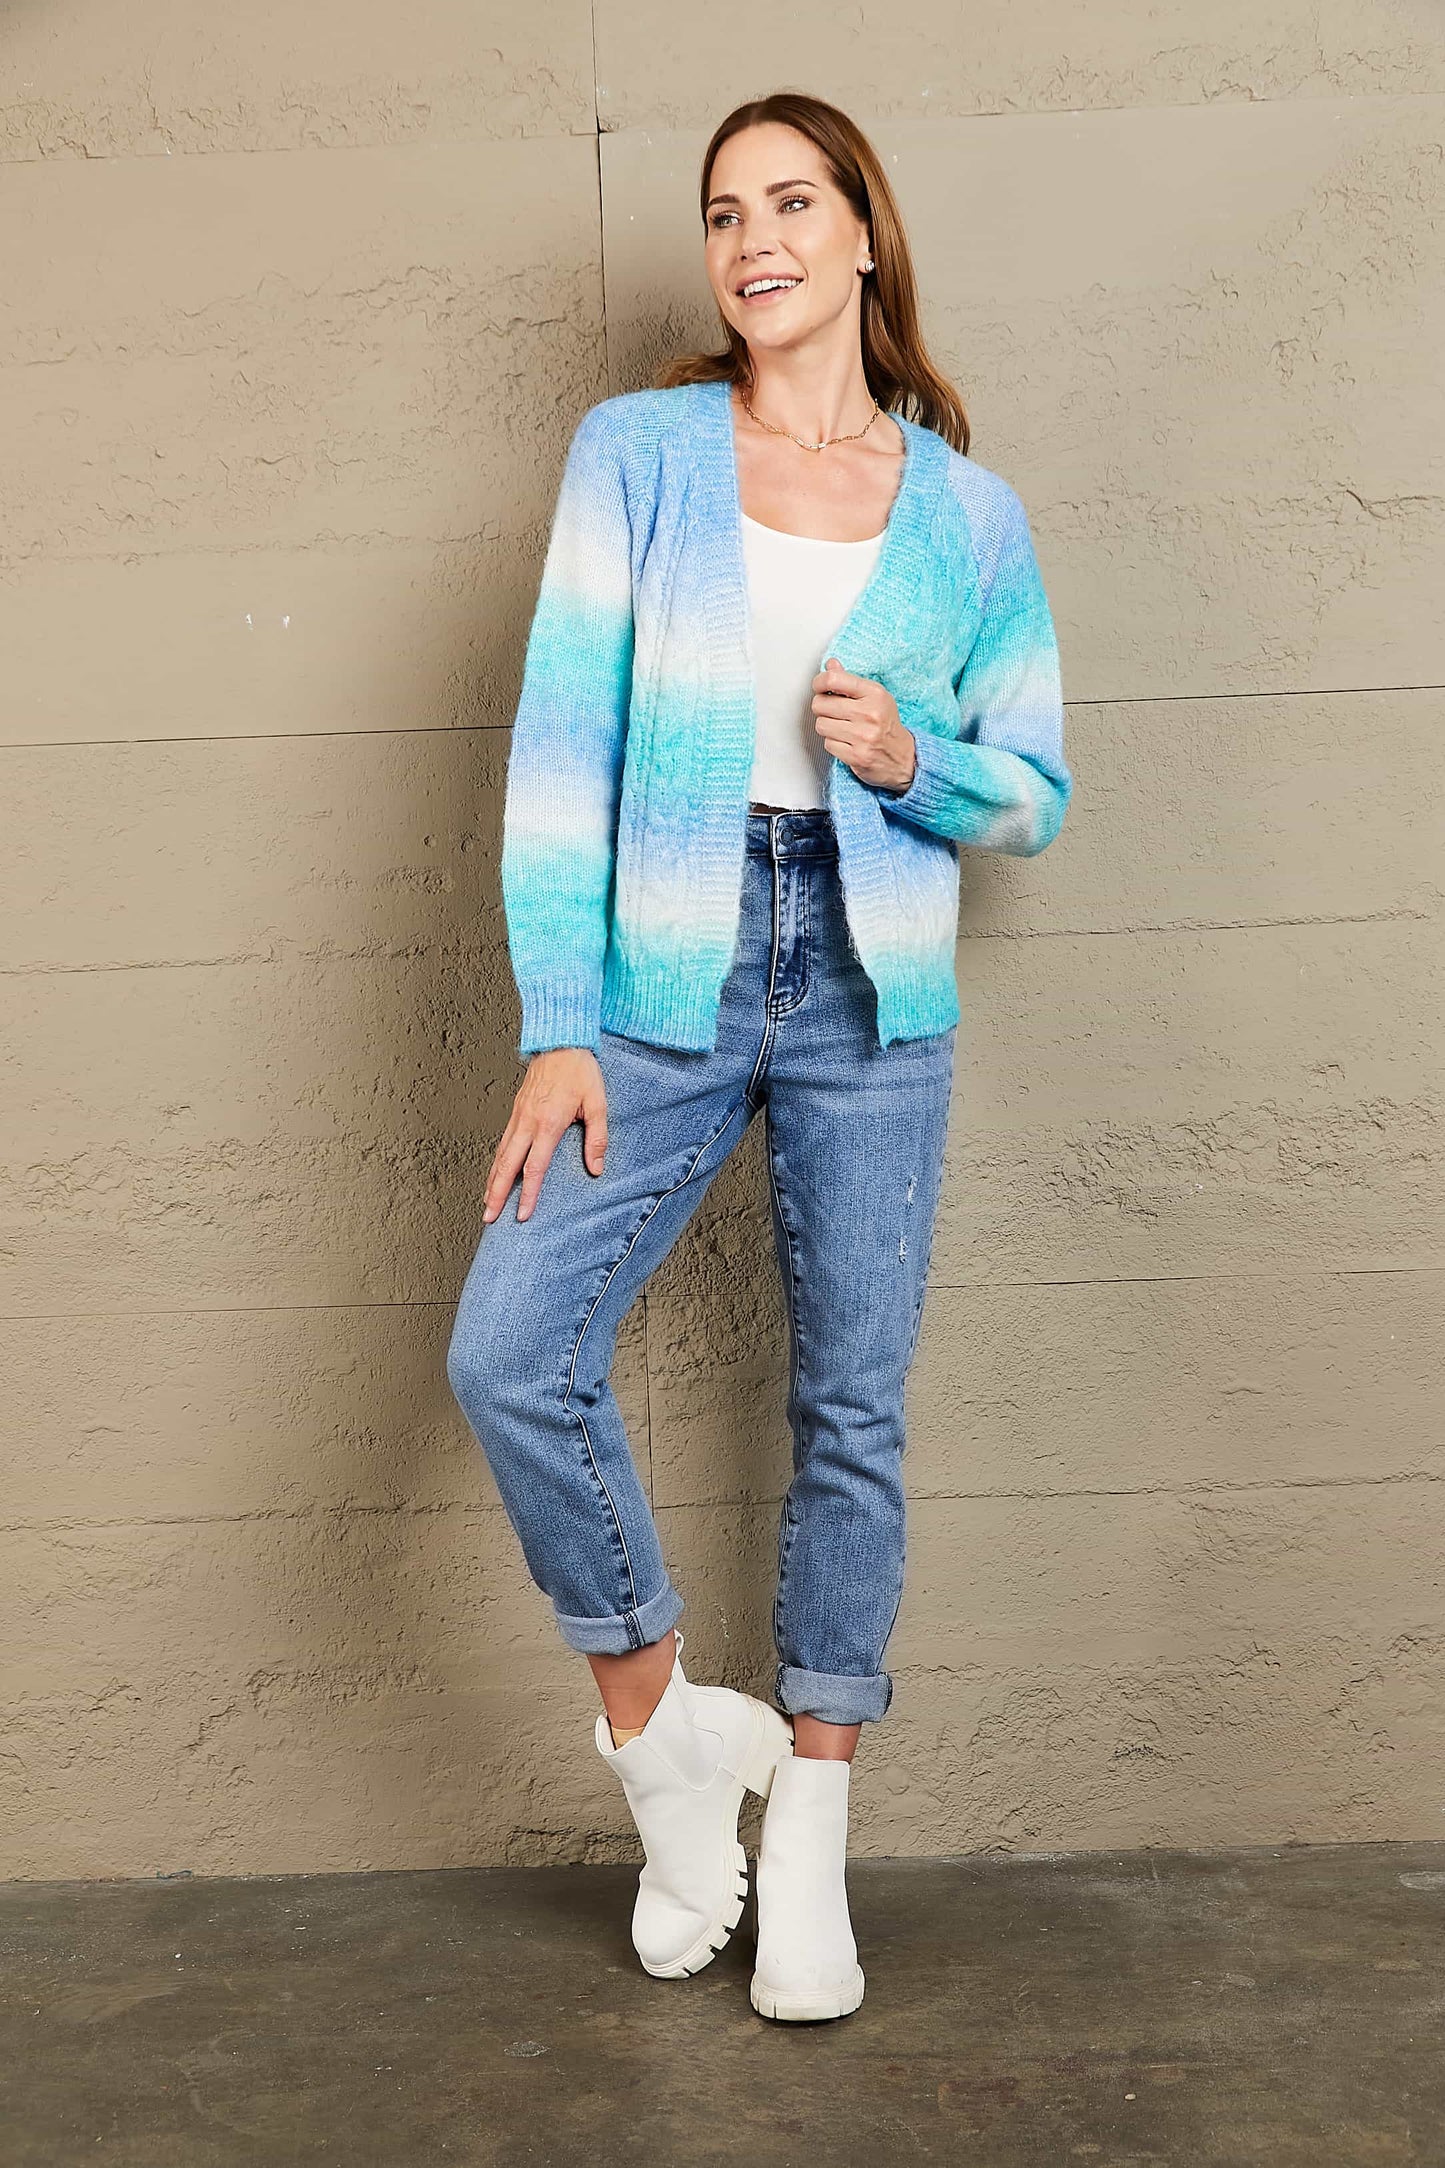 Woven Right Tie-Dye Cable-Knit Raglan Sleeve Open Front Cardigan